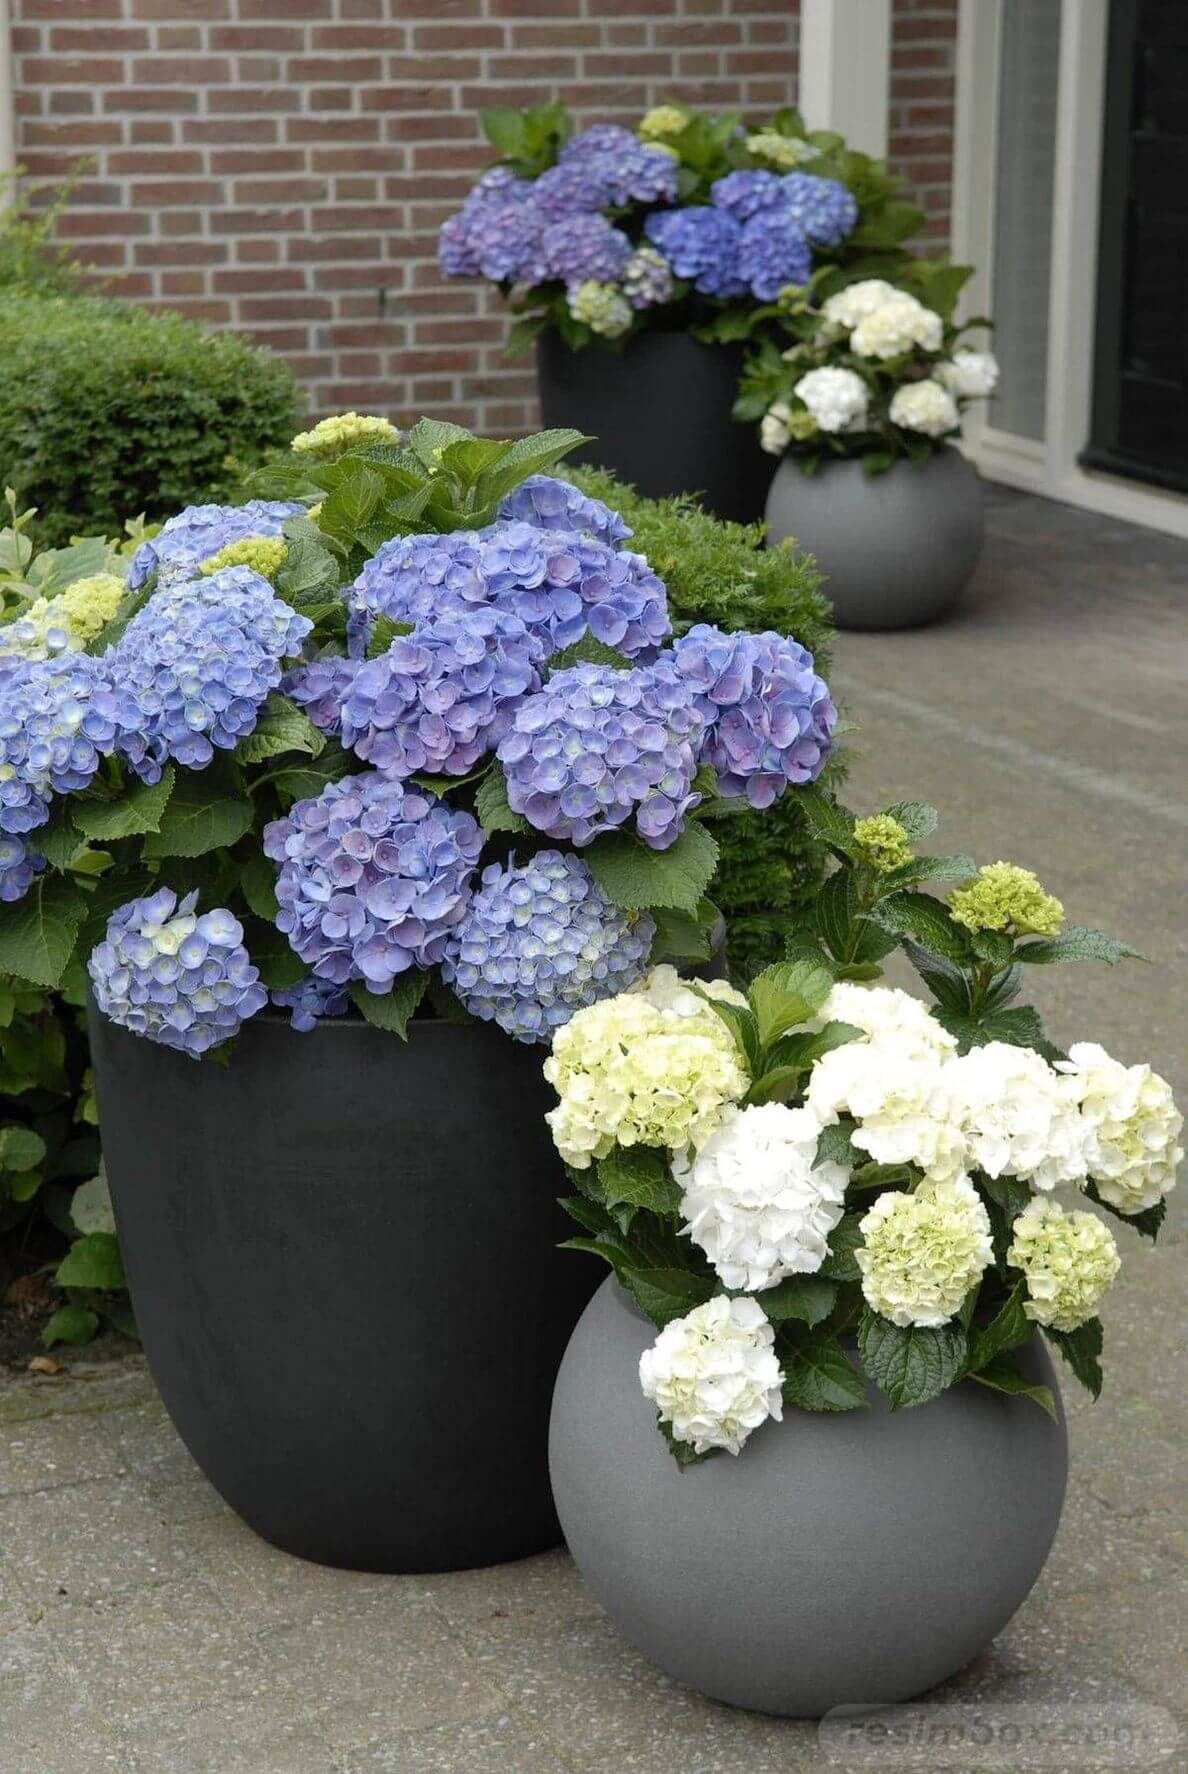 Creative Container Gardening: Beautiful Ways to Showcase Plants in Pots